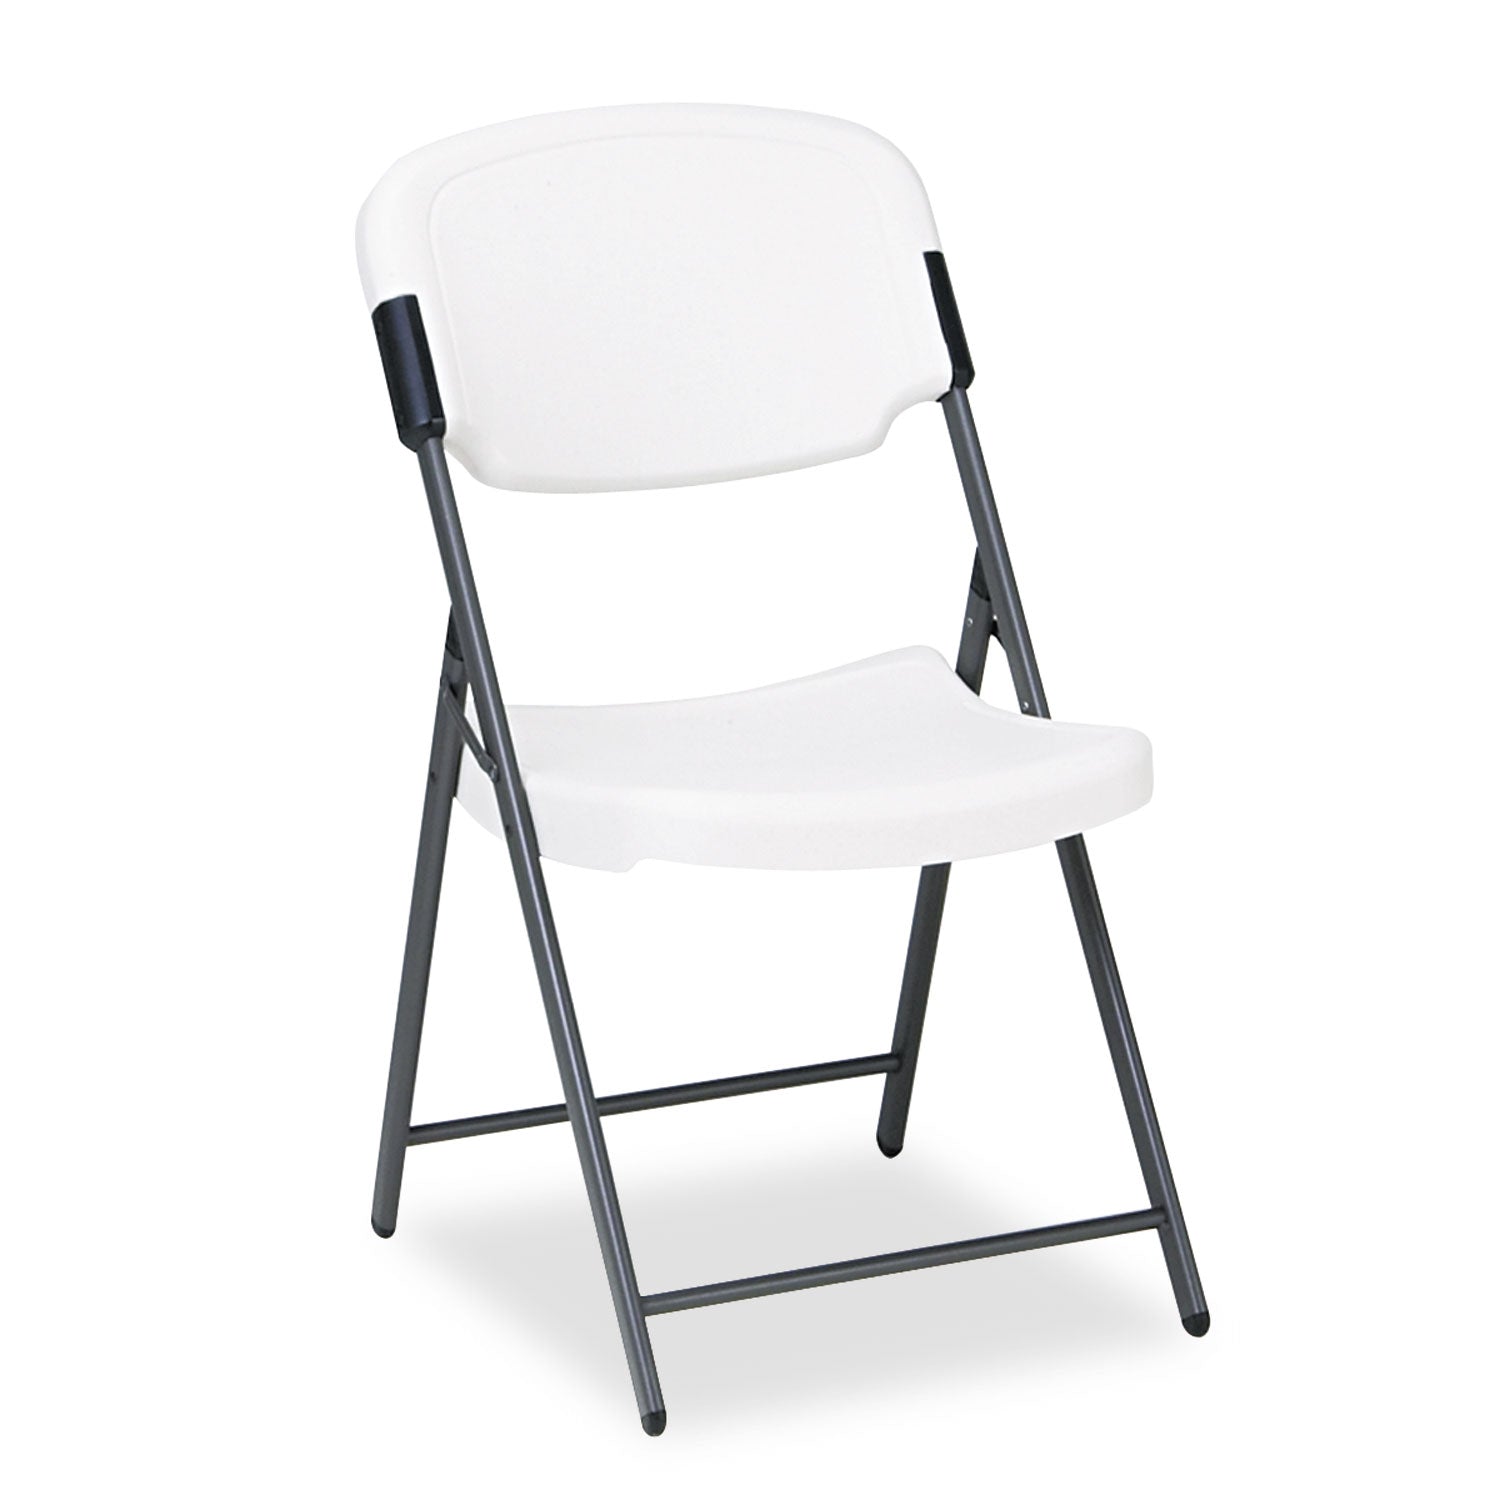 Rough n Ready Commercial Folding Chair, Supports Up to 350 lb, 15.25" Seat Height, Platinum Seat, Platinum Back, Black Base - 1